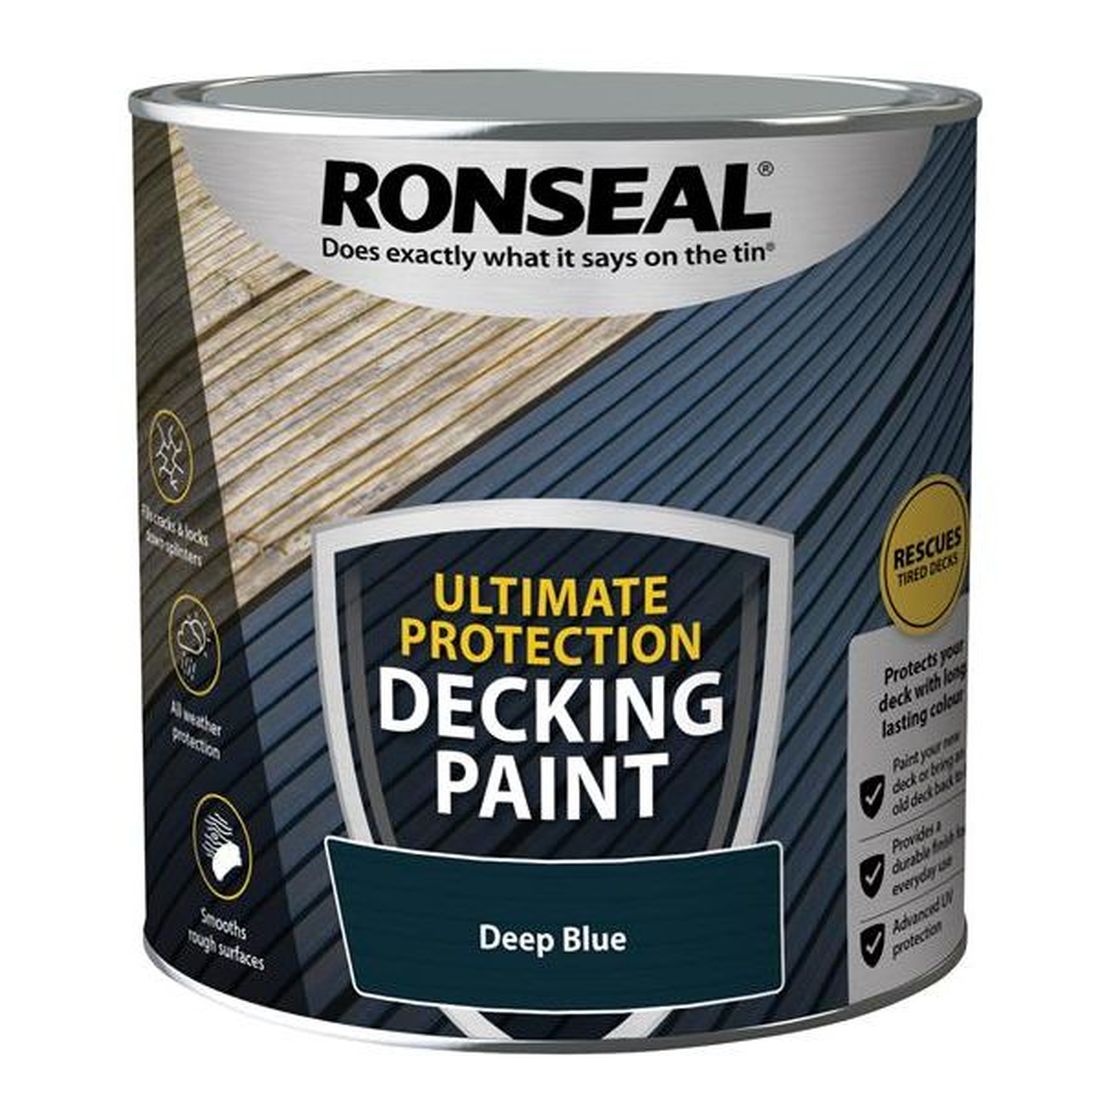 Ronseal Ultimate Protection Decking Paint Deep Blue 2.5 litre                           